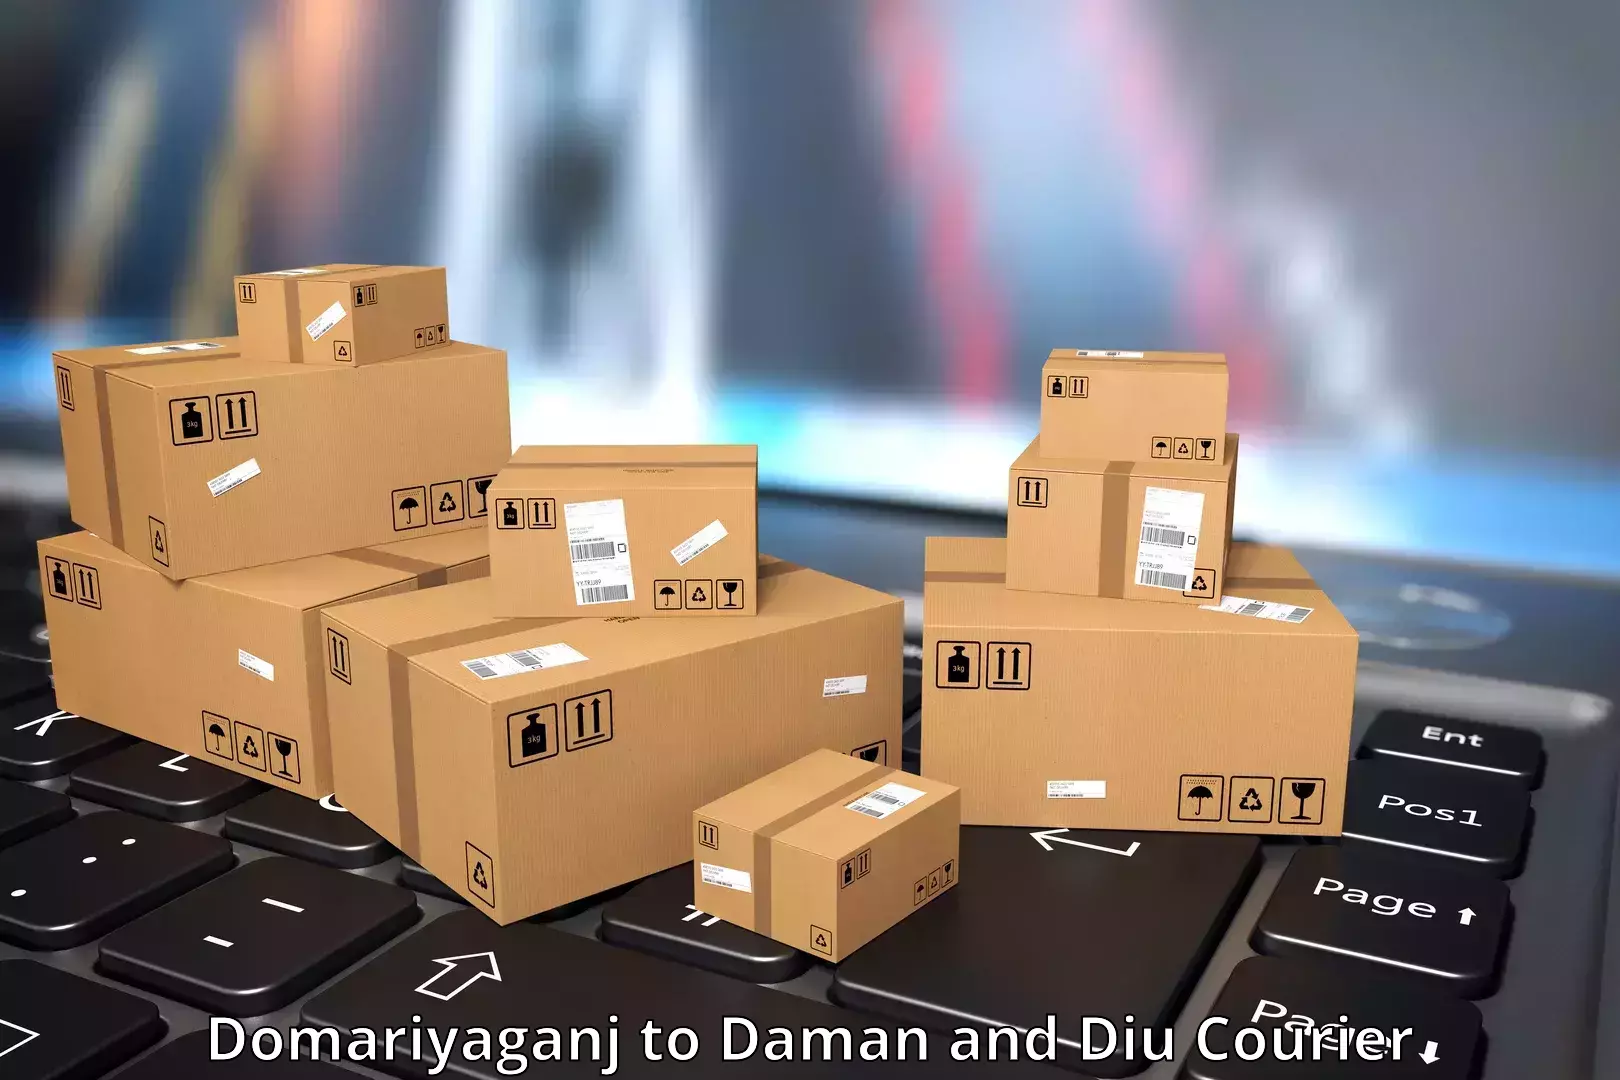 State-of-the-art courier technology Domariyaganj to Diu